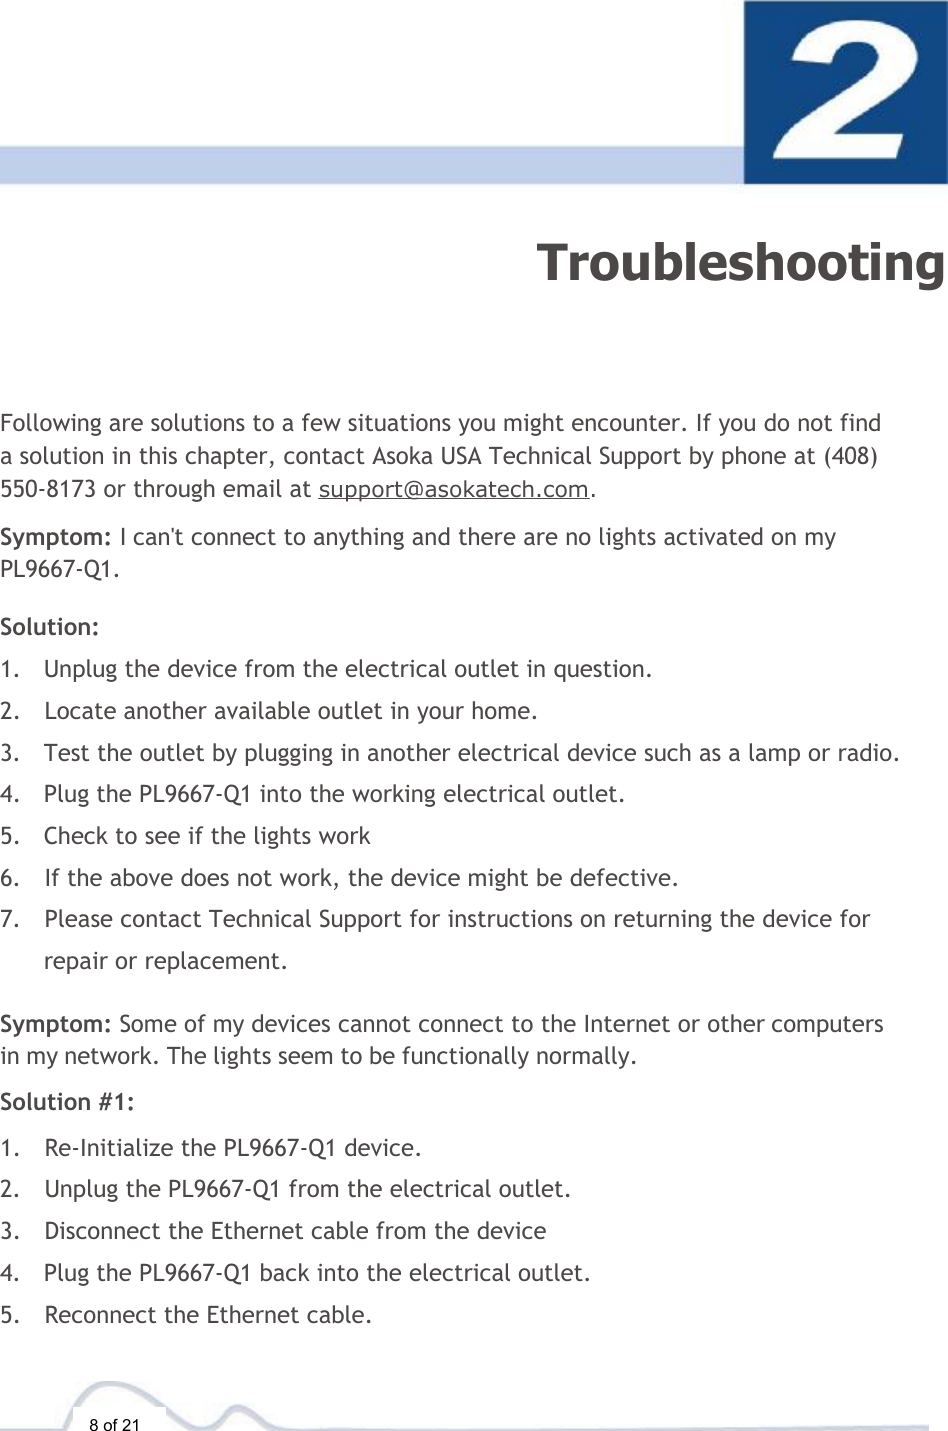  8 of 21  Troubleshooting Following are solutions to a few situations you might encounter. If you do not find a solution in this chapter, contact Asoka USA Technical Support by phone at (408) 550-8173 or through email at support@asokatech.com.  Symptom: I can&apos;t connect to anything and there are no lights activated on my PL9667-Q1.  Solution:  1. Unplug the device from the electrical outlet in question. 2. Locate another available outlet in your home. 3. Test the outlet by plugging in another electrical device such as a lamp or radio. 4. Plug the PL9667-Q1 into the working electrical outlet. 5. Check to see if the lights work 6. If the above does not work, the device might be defective. 7. Please contact Technical Support for instructions on returning the device for repair or replacement.  Symptom: Some of my devices cannot connect to the Internet or other computers in my network. The lights seem to be functionally normally.  Solution #1:  1. Re-Initialize the PL9667-Q1 device. 2. Unplug the PL9667-Q1 from the electrical outlet. 3. Disconnect the Ethernet cable from the device 4. Plug the PL9667-Q1 back into the electrical outlet. 5. Reconnect the Ethernet cable. 